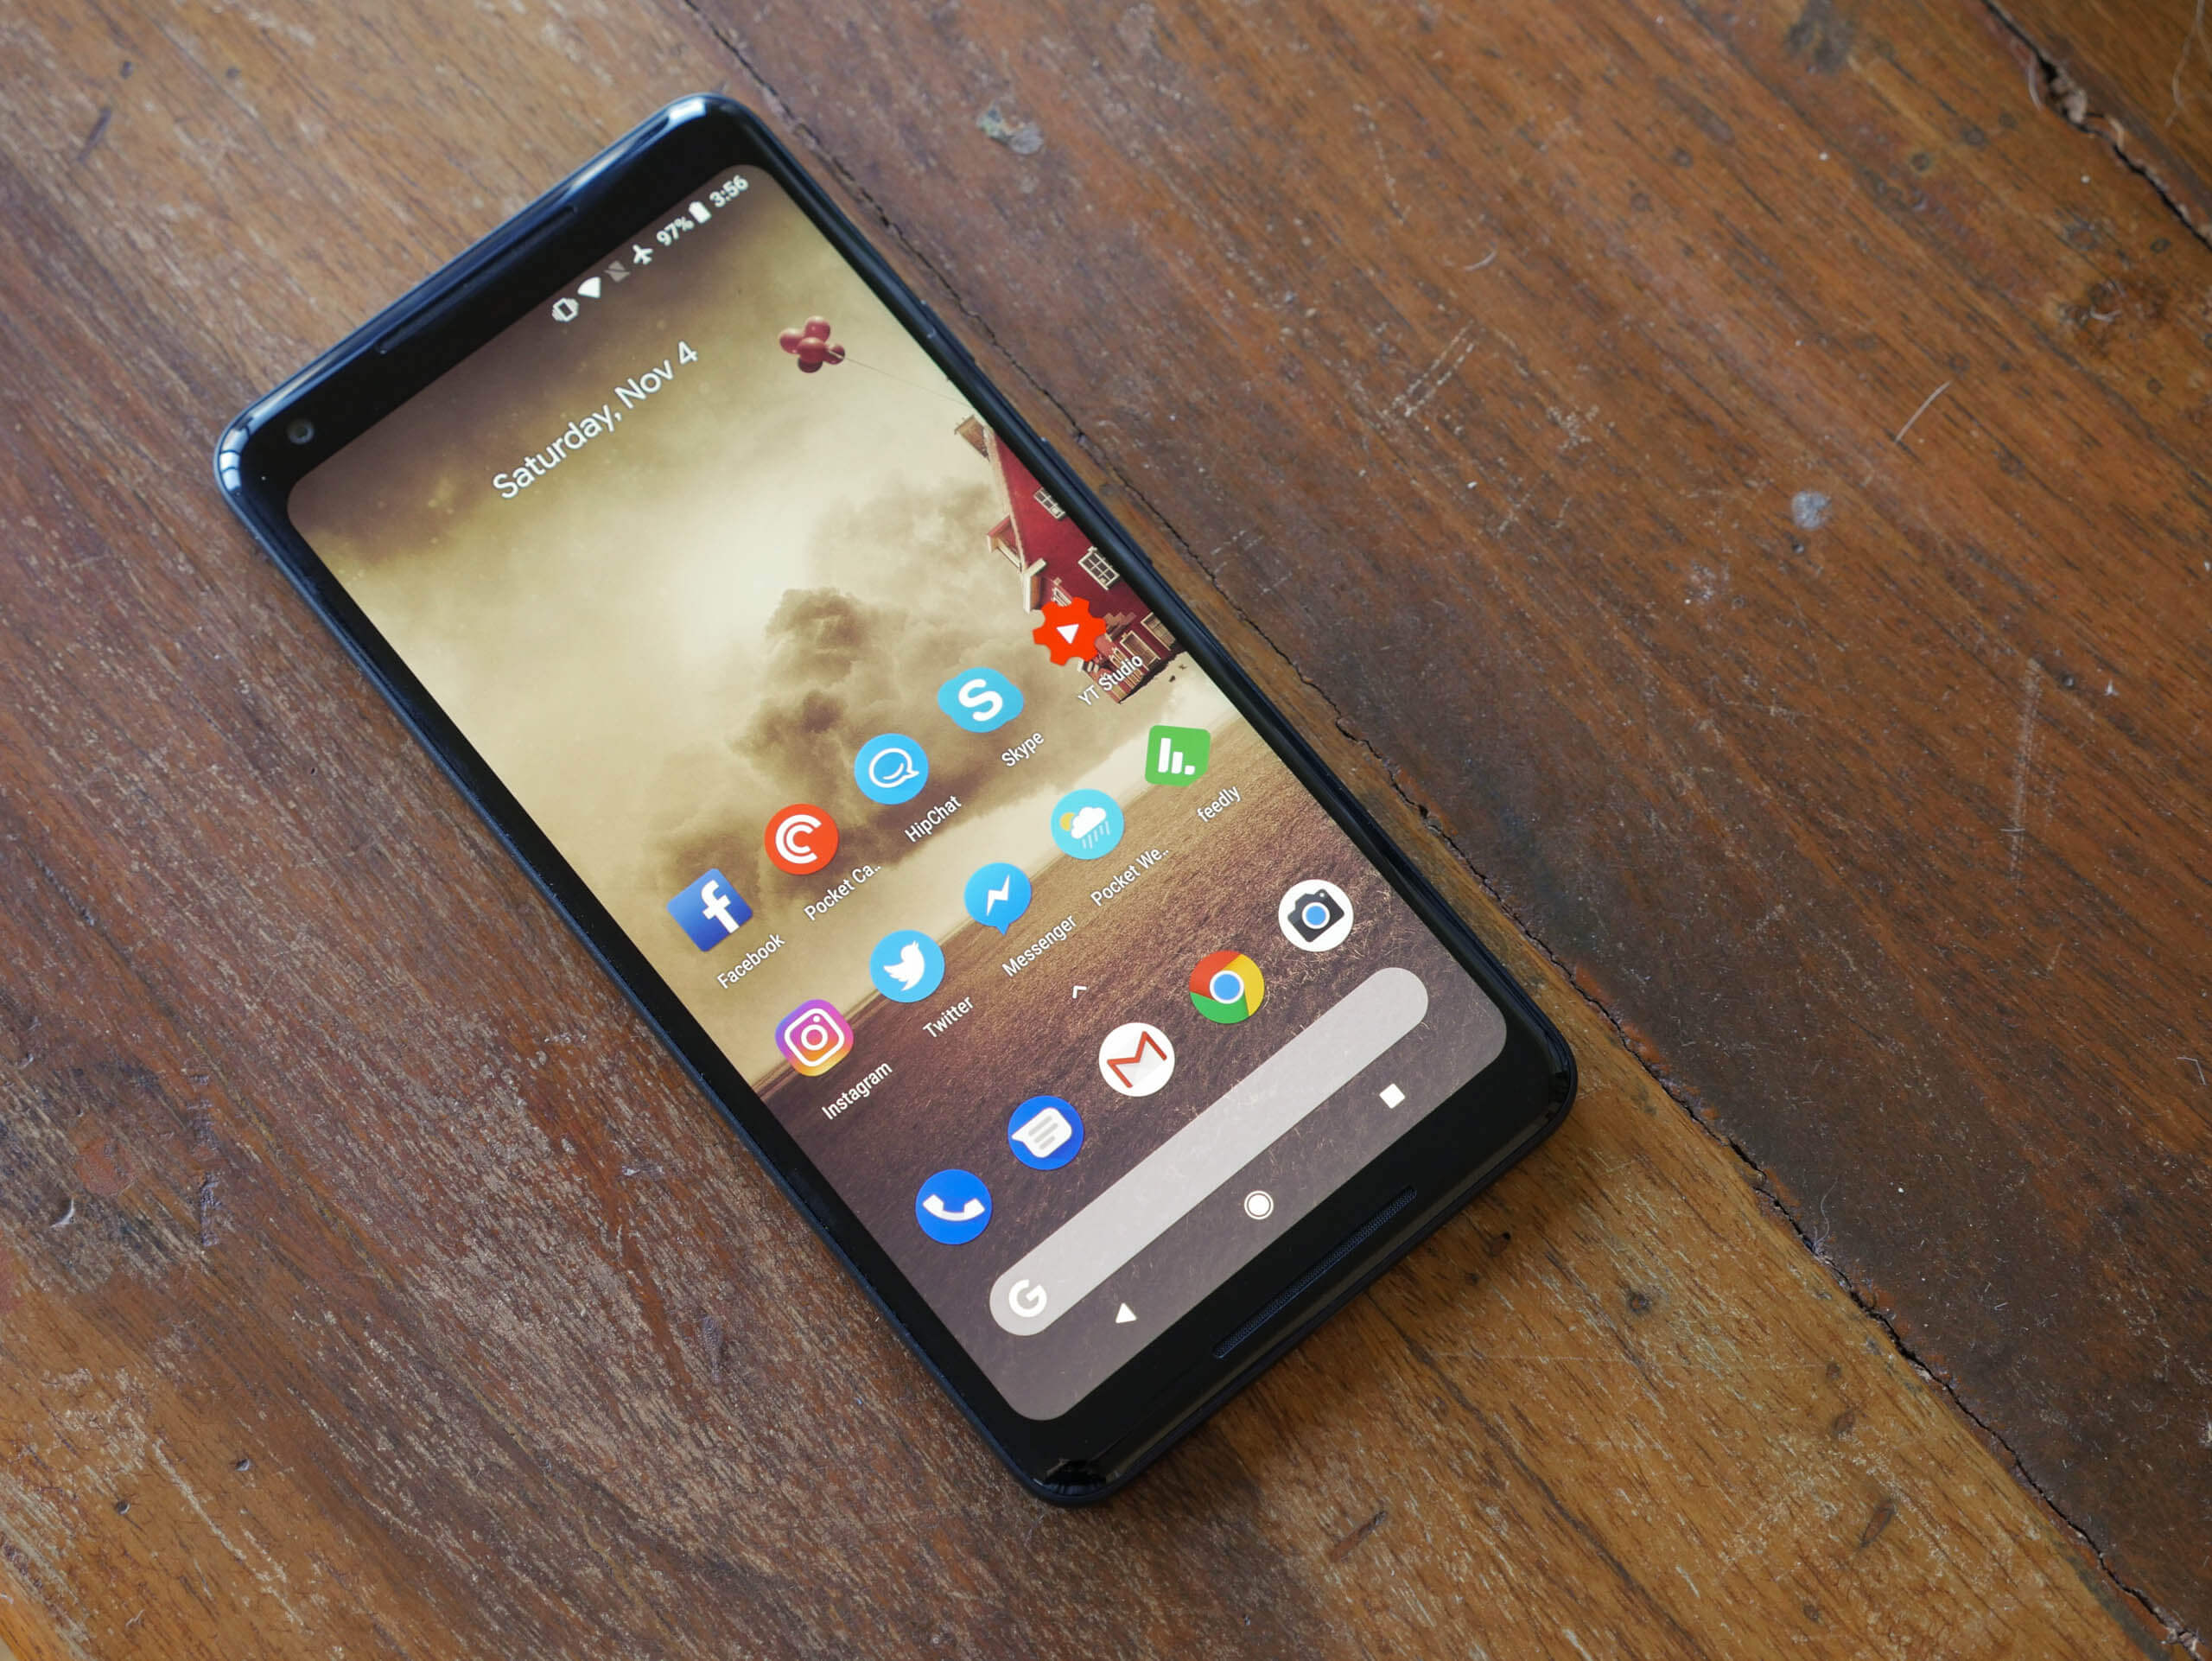 Google is reportedly looking to shift Pixel production from China to Vietnam